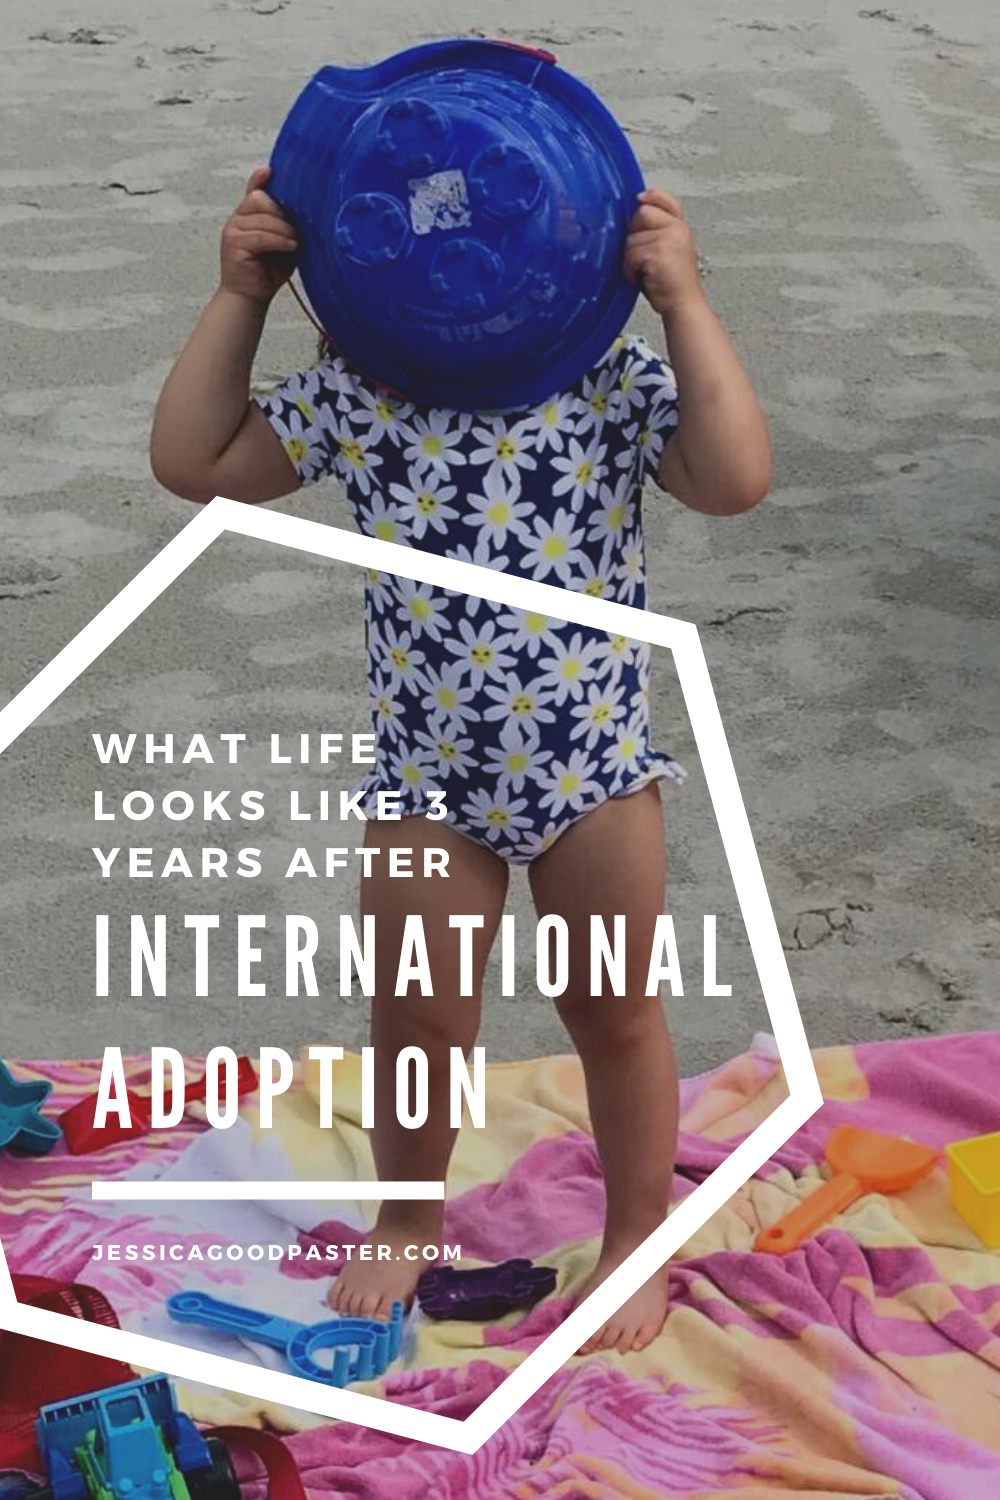 What Life Looks Like 3 Years After International Adoption | Adoption parenting has challenges and blessings that are different than raising biological children. Read this mom's reflection on life three years after her international adoption journey. Part one of this series includes medical needs, developmental milestones, and school anecdotes. #adoption #chinaadoption #adoptionjourney #gotchaday #parenting #internationaladoption